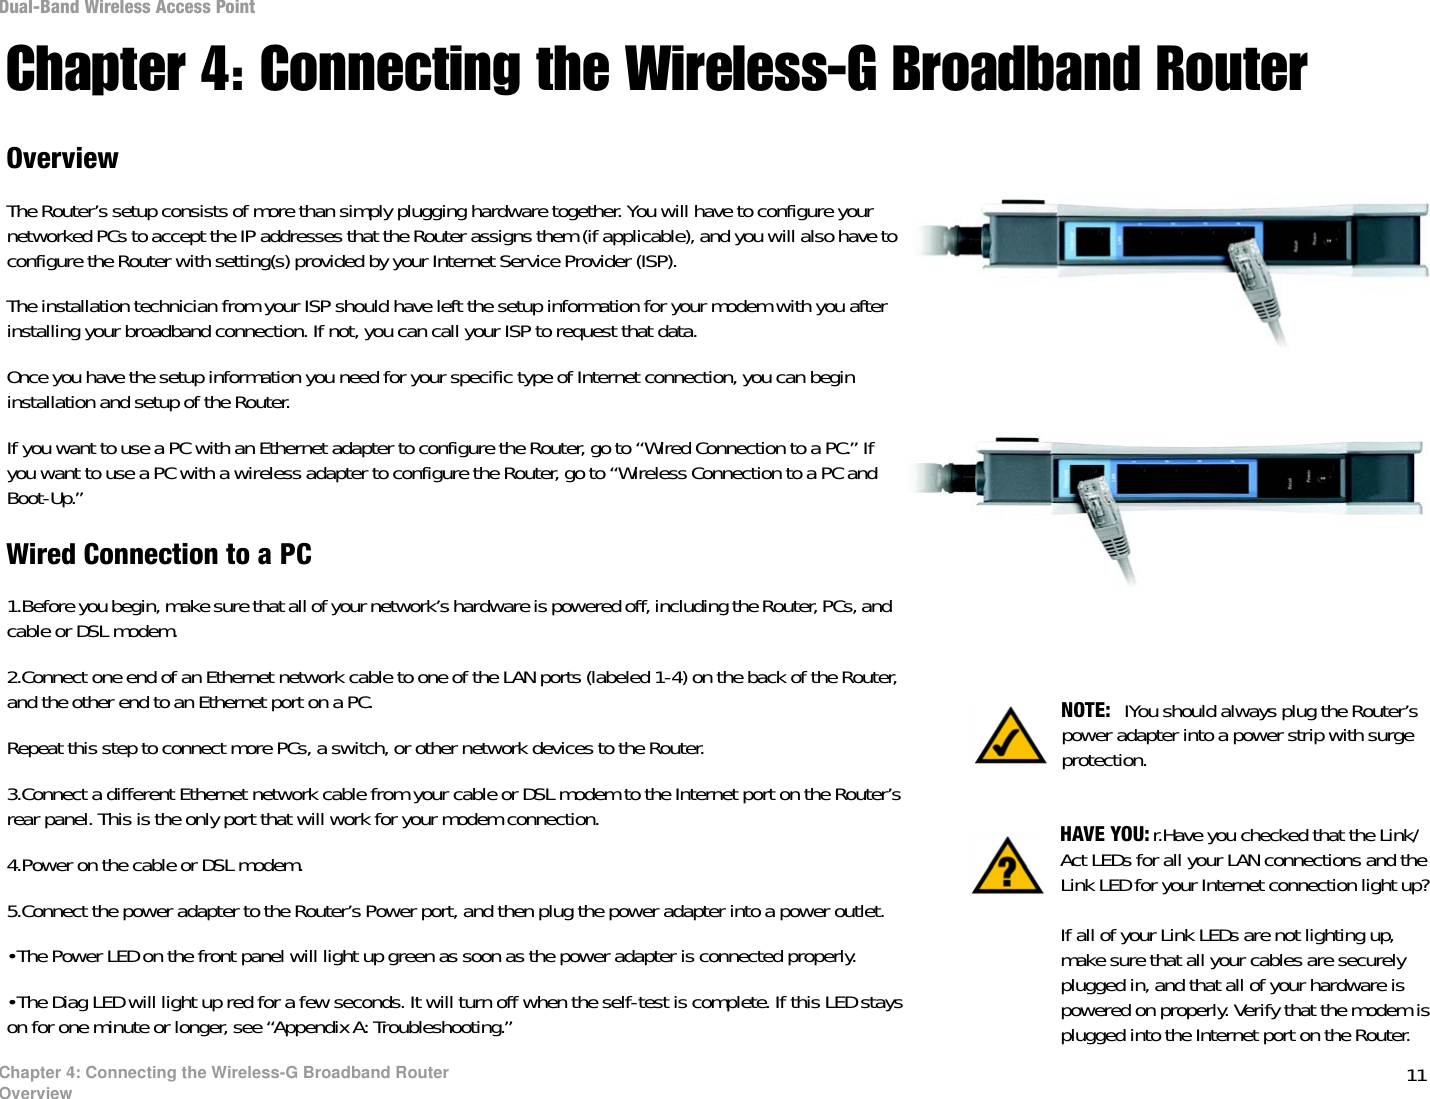 11Chapter 4: Connecting the Wireless-G Broadband RouterOverviewDual-Band Wireless Access PointChapter 4: Connecting the Wireless-G Broadband RouterOverviewThe Router’s setup consists of more than simply plugging hardware together. You will have to configure your networked PCs to accept the IP addresses that the Router assigns them (if applicable), and you will also have to configure the Router with setting(s) provided by your Internet Service Provider (ISP).The installation technician from your ISP should have left the setup information for your modem with you after installing your broadband connection. If not, you can call your ISP to request that data. Once you have the setup information you need for your specific type of Internet connection, you can begin installation and setup of the Router.If you want to use a PC with an Ethernet adapter to configure the Router, go to “Wired Connection to a PC.” If you want to use a PC with a wireless adapter to configure the Router, go to “Wireless Connection to a PC and Boot-Up.”Wired Connection to a PC1.Before you begin, make sure that all of your network’s hardware is powered off, including the Router, PCs, and cable or DSL modem.2.Connect one end of an Ethernet network cable to one of the LAN ports (labeled 1-4) on the back of the Router, and the other end to an Ethernet port on a PC. Repeat this step to connect more PCs, a switch, or other network devices to the Router.3.Connect a different Ethernet network cable from your cable or DSL modem to the Internet port on the Router’s rear panel. This is the only port that will work for your modem connection. 4.Power on the cable or DSL modem. 5.Connect the power adapter to the Router’s Power port, and then plug the power adapter into a power outlet.  •The Power LED on the front panel will light up green as soon as the power adapter is connected properly.•The Diag LED will light up red for a few seconds. It will turn off when the self-test is complete. If this LED stays on for one minute or longer, see “Appendix A: Troubleshooting.” NOTE:  IYou should always plug the Router’s power adapter into a power strip with surge protection.HAVE YOU: r.Have you checked that the Link/Act LEDs for all your LAN connections and the Link LED for your Internet connection light up? If all of your Link LEDs are not lighting up, make sure that all your cables are securely plugged in, and that all of your hardware is powered on properly. Verify that the modem is plugged into the Internet port on the Router.